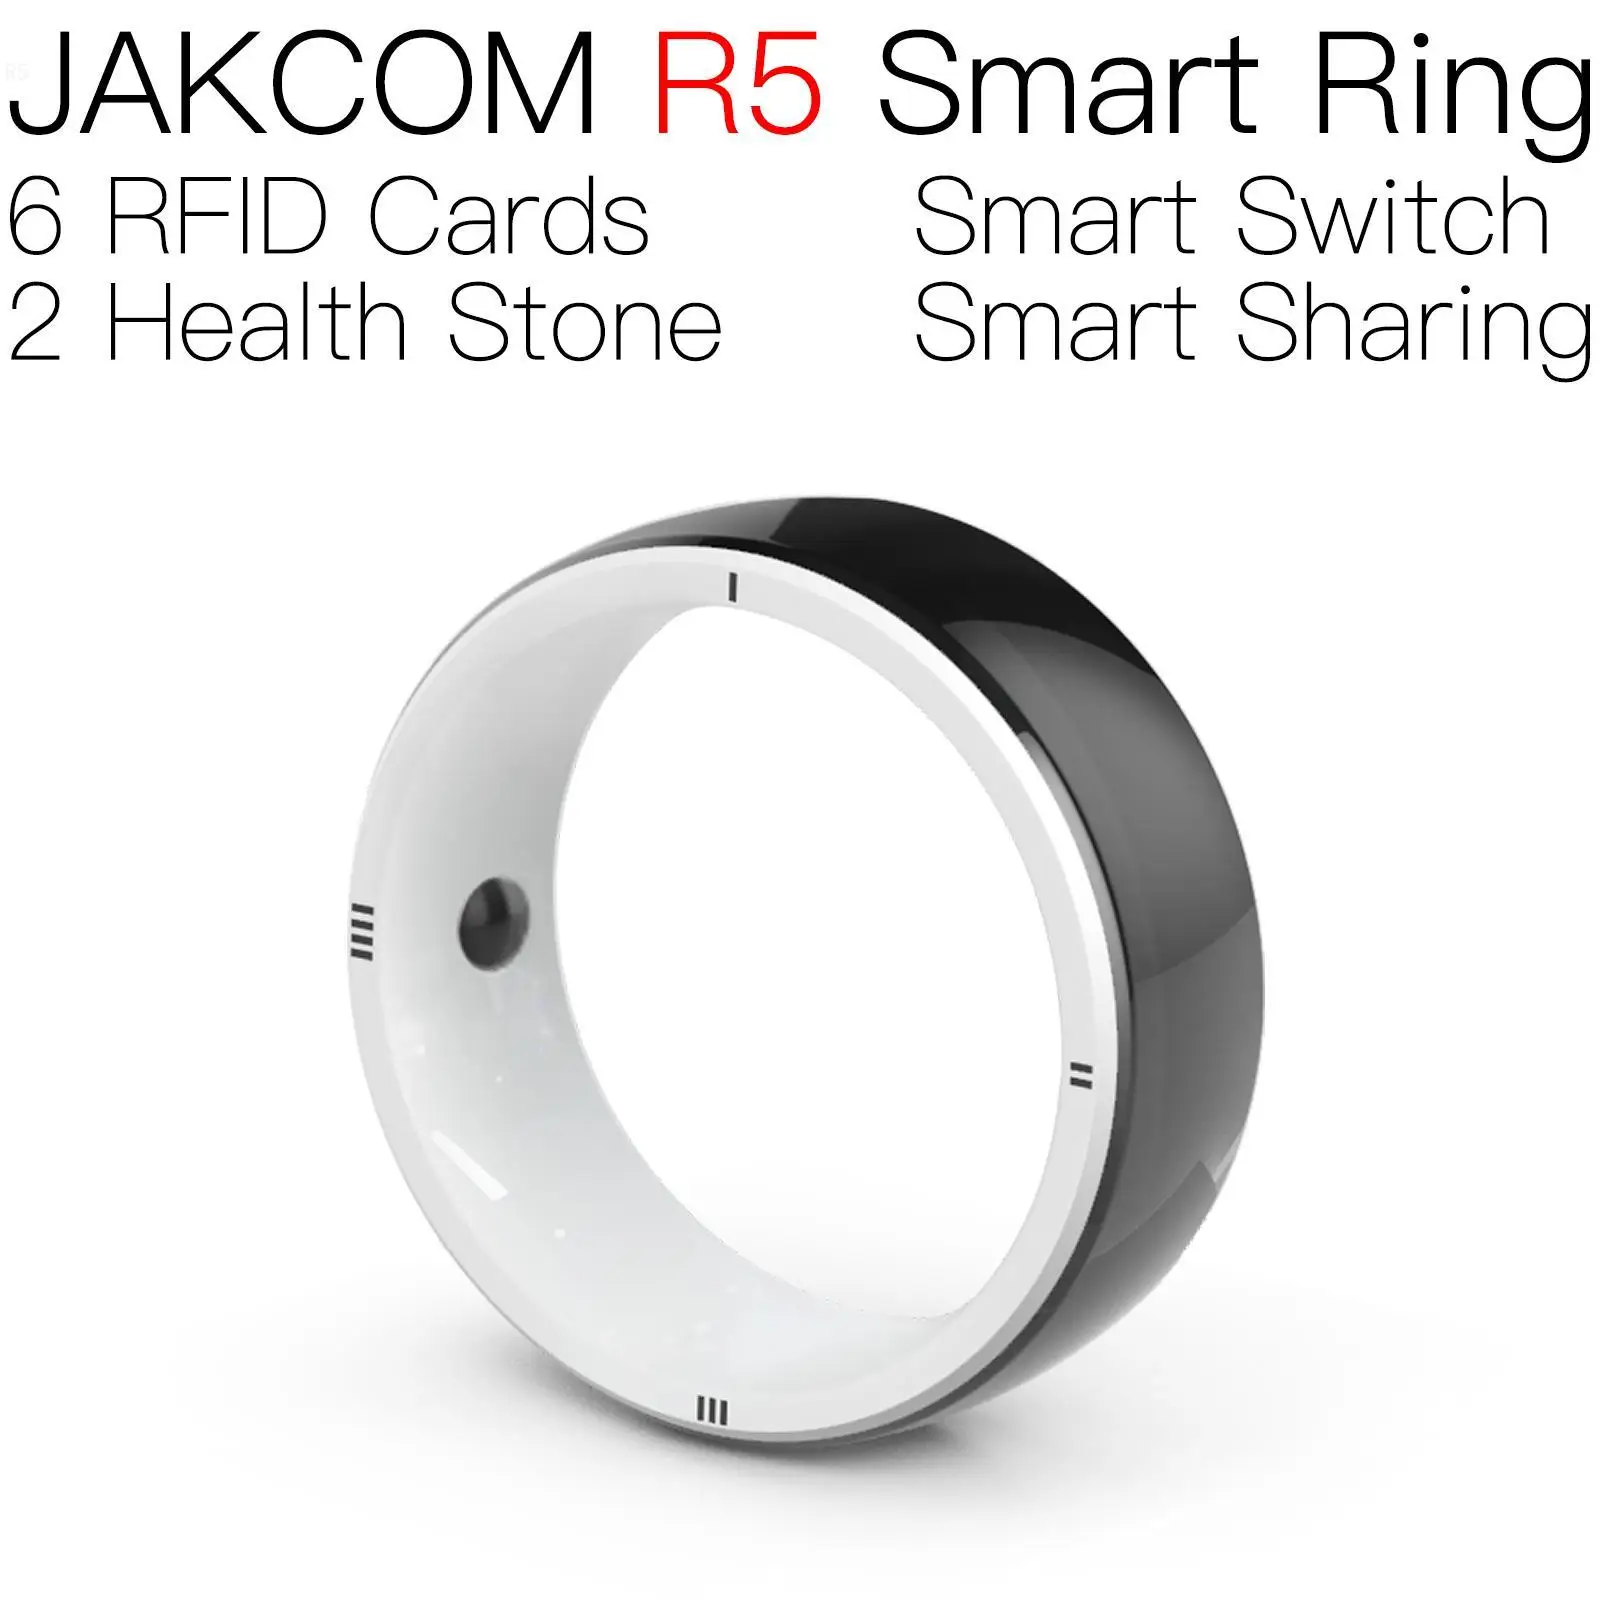 

JAKCOM R5 Smart Ring For men women rfid sticker 125 acnh furnitures island vip tag red nfc keychain anti theft barcode